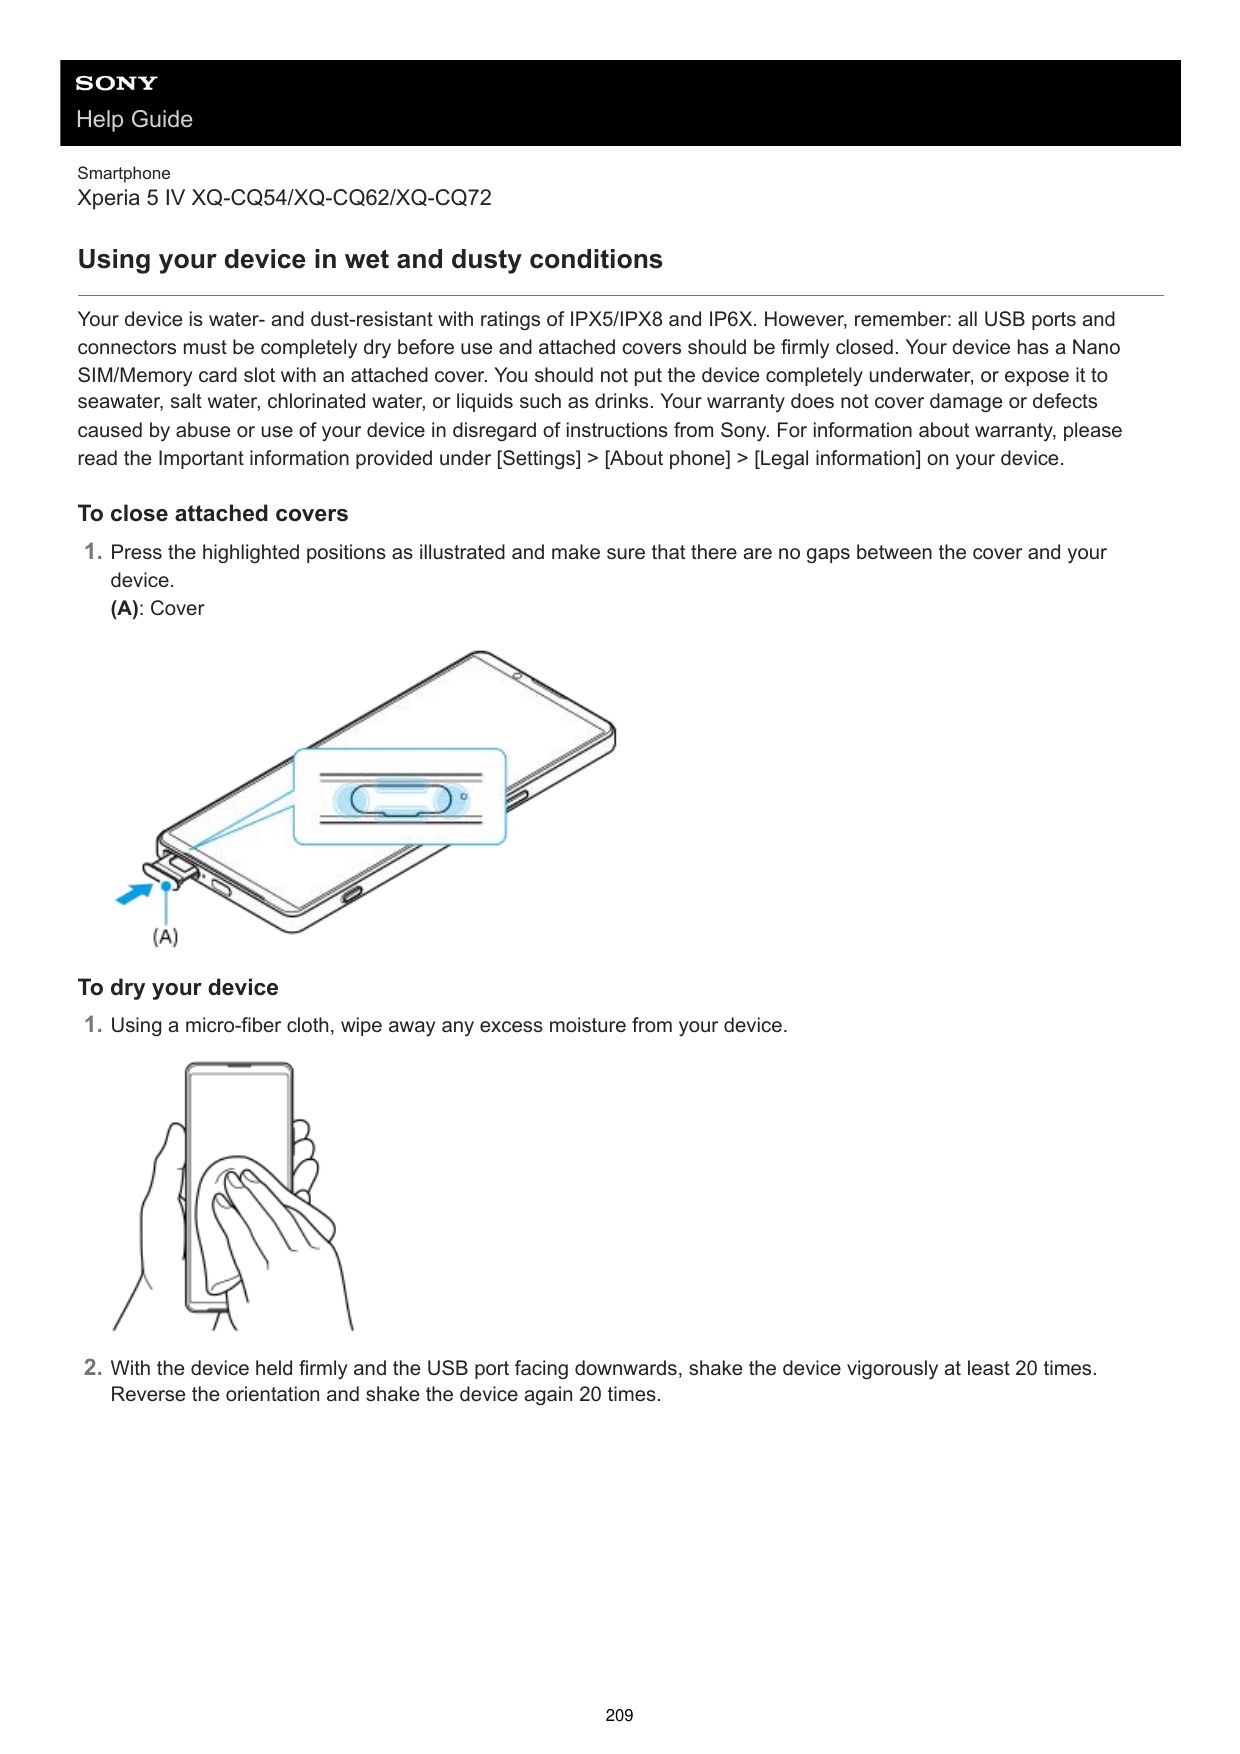 Help GuideSmartphoneXperia 5 IV XQ-CQ54/XQ-CQ62/XQ-CQ72Using your device in wet and dusty conditionsYour device is water- and du